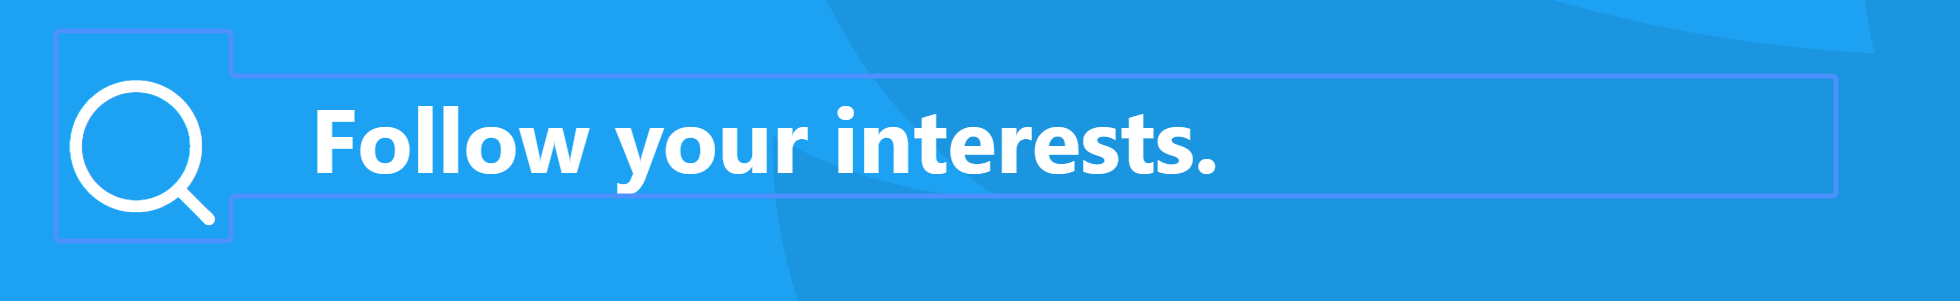 nearly invisible focus outline around the text 'Follow your interests'